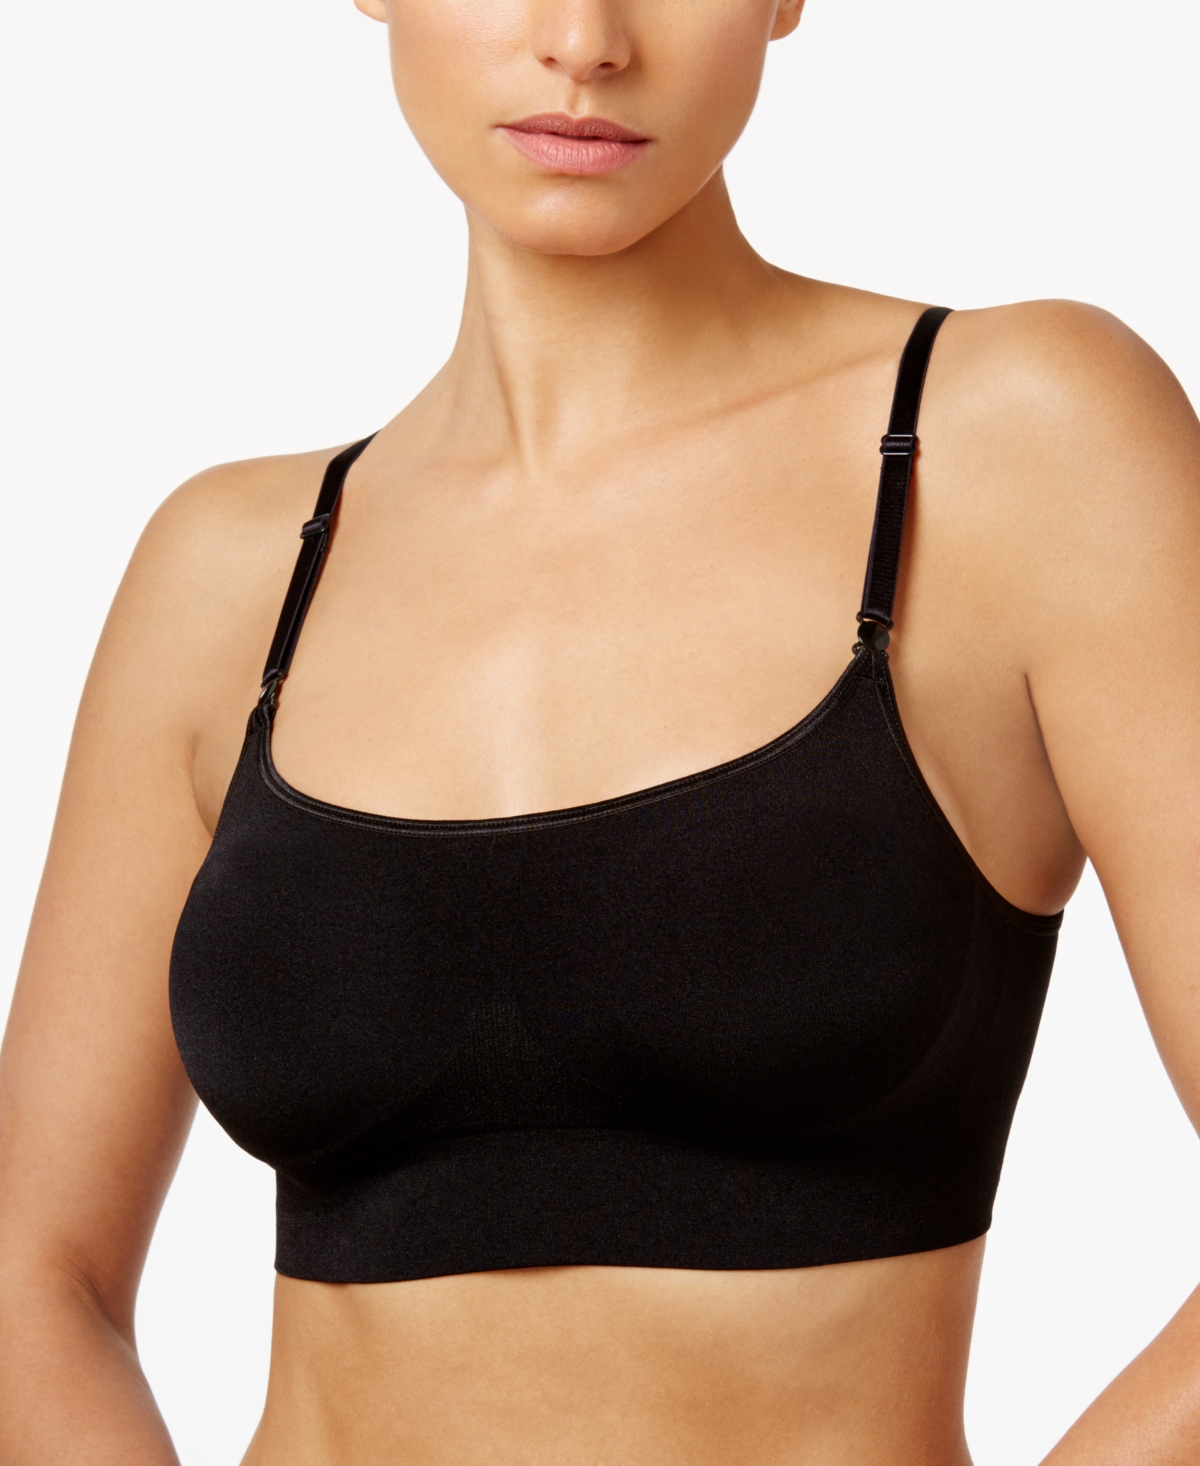 Warner's Women's Cloud 9 Smooth Comfort Lift Wire-Free T-Shirt Bra -  RN1041A XXL Toasted Almond